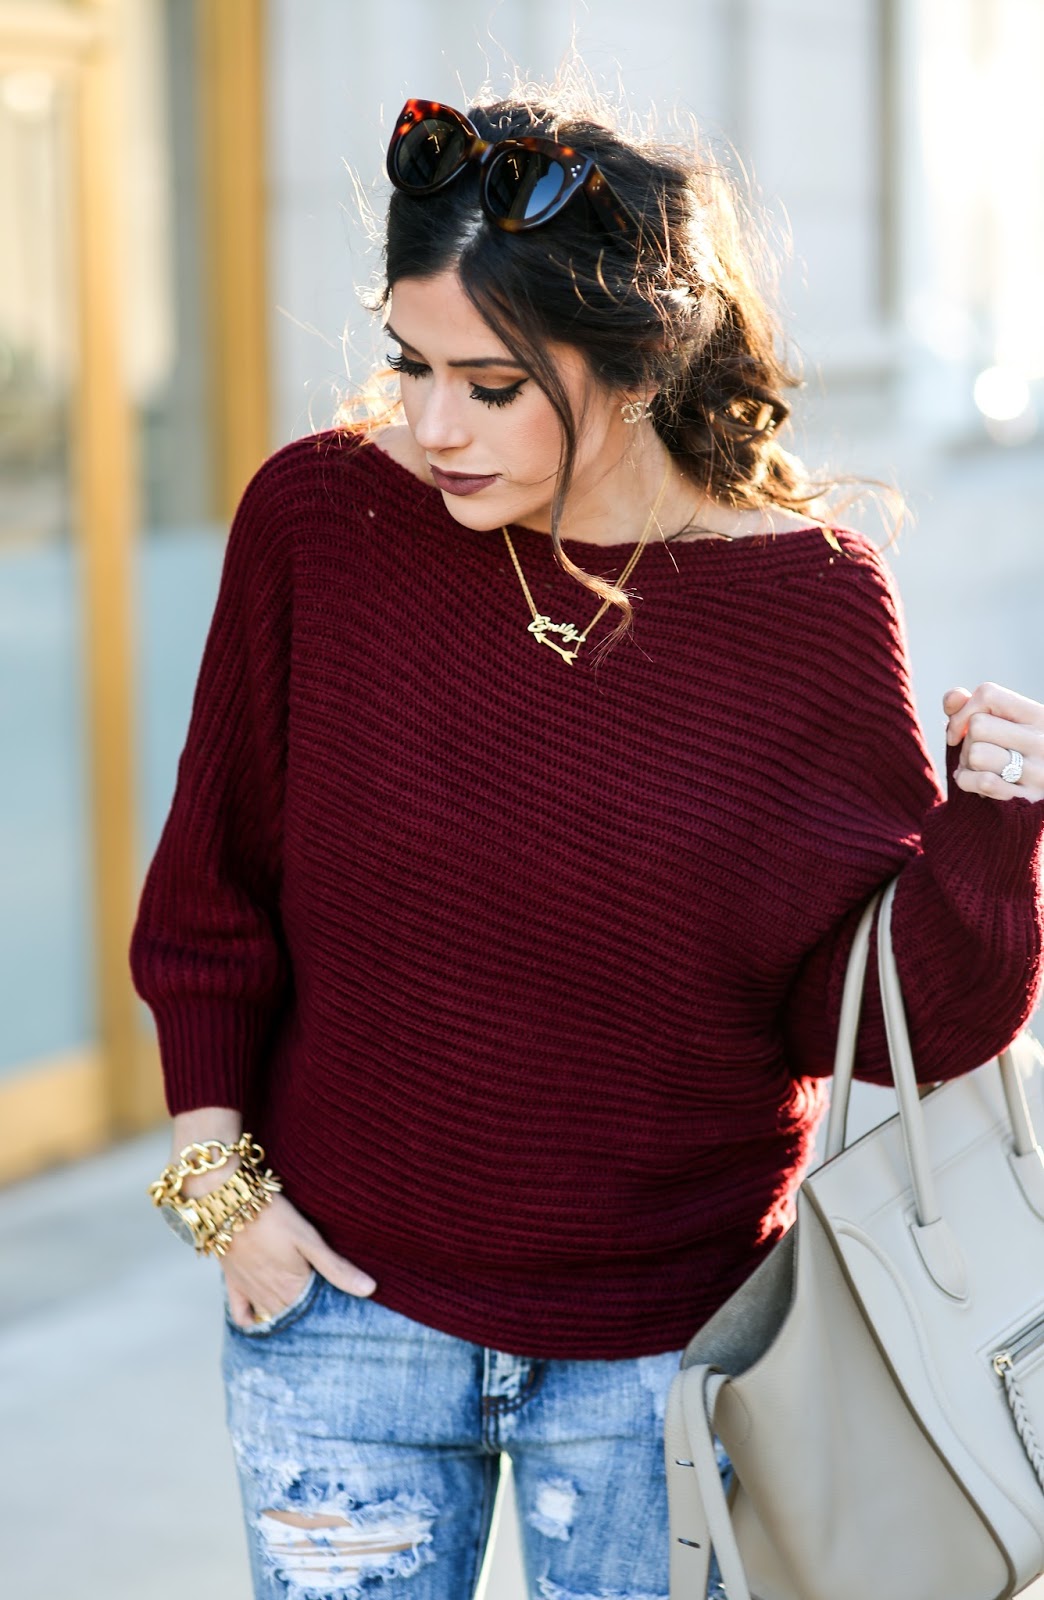 Laid Back Outfit | Holiday Style | The Sweetest Thing